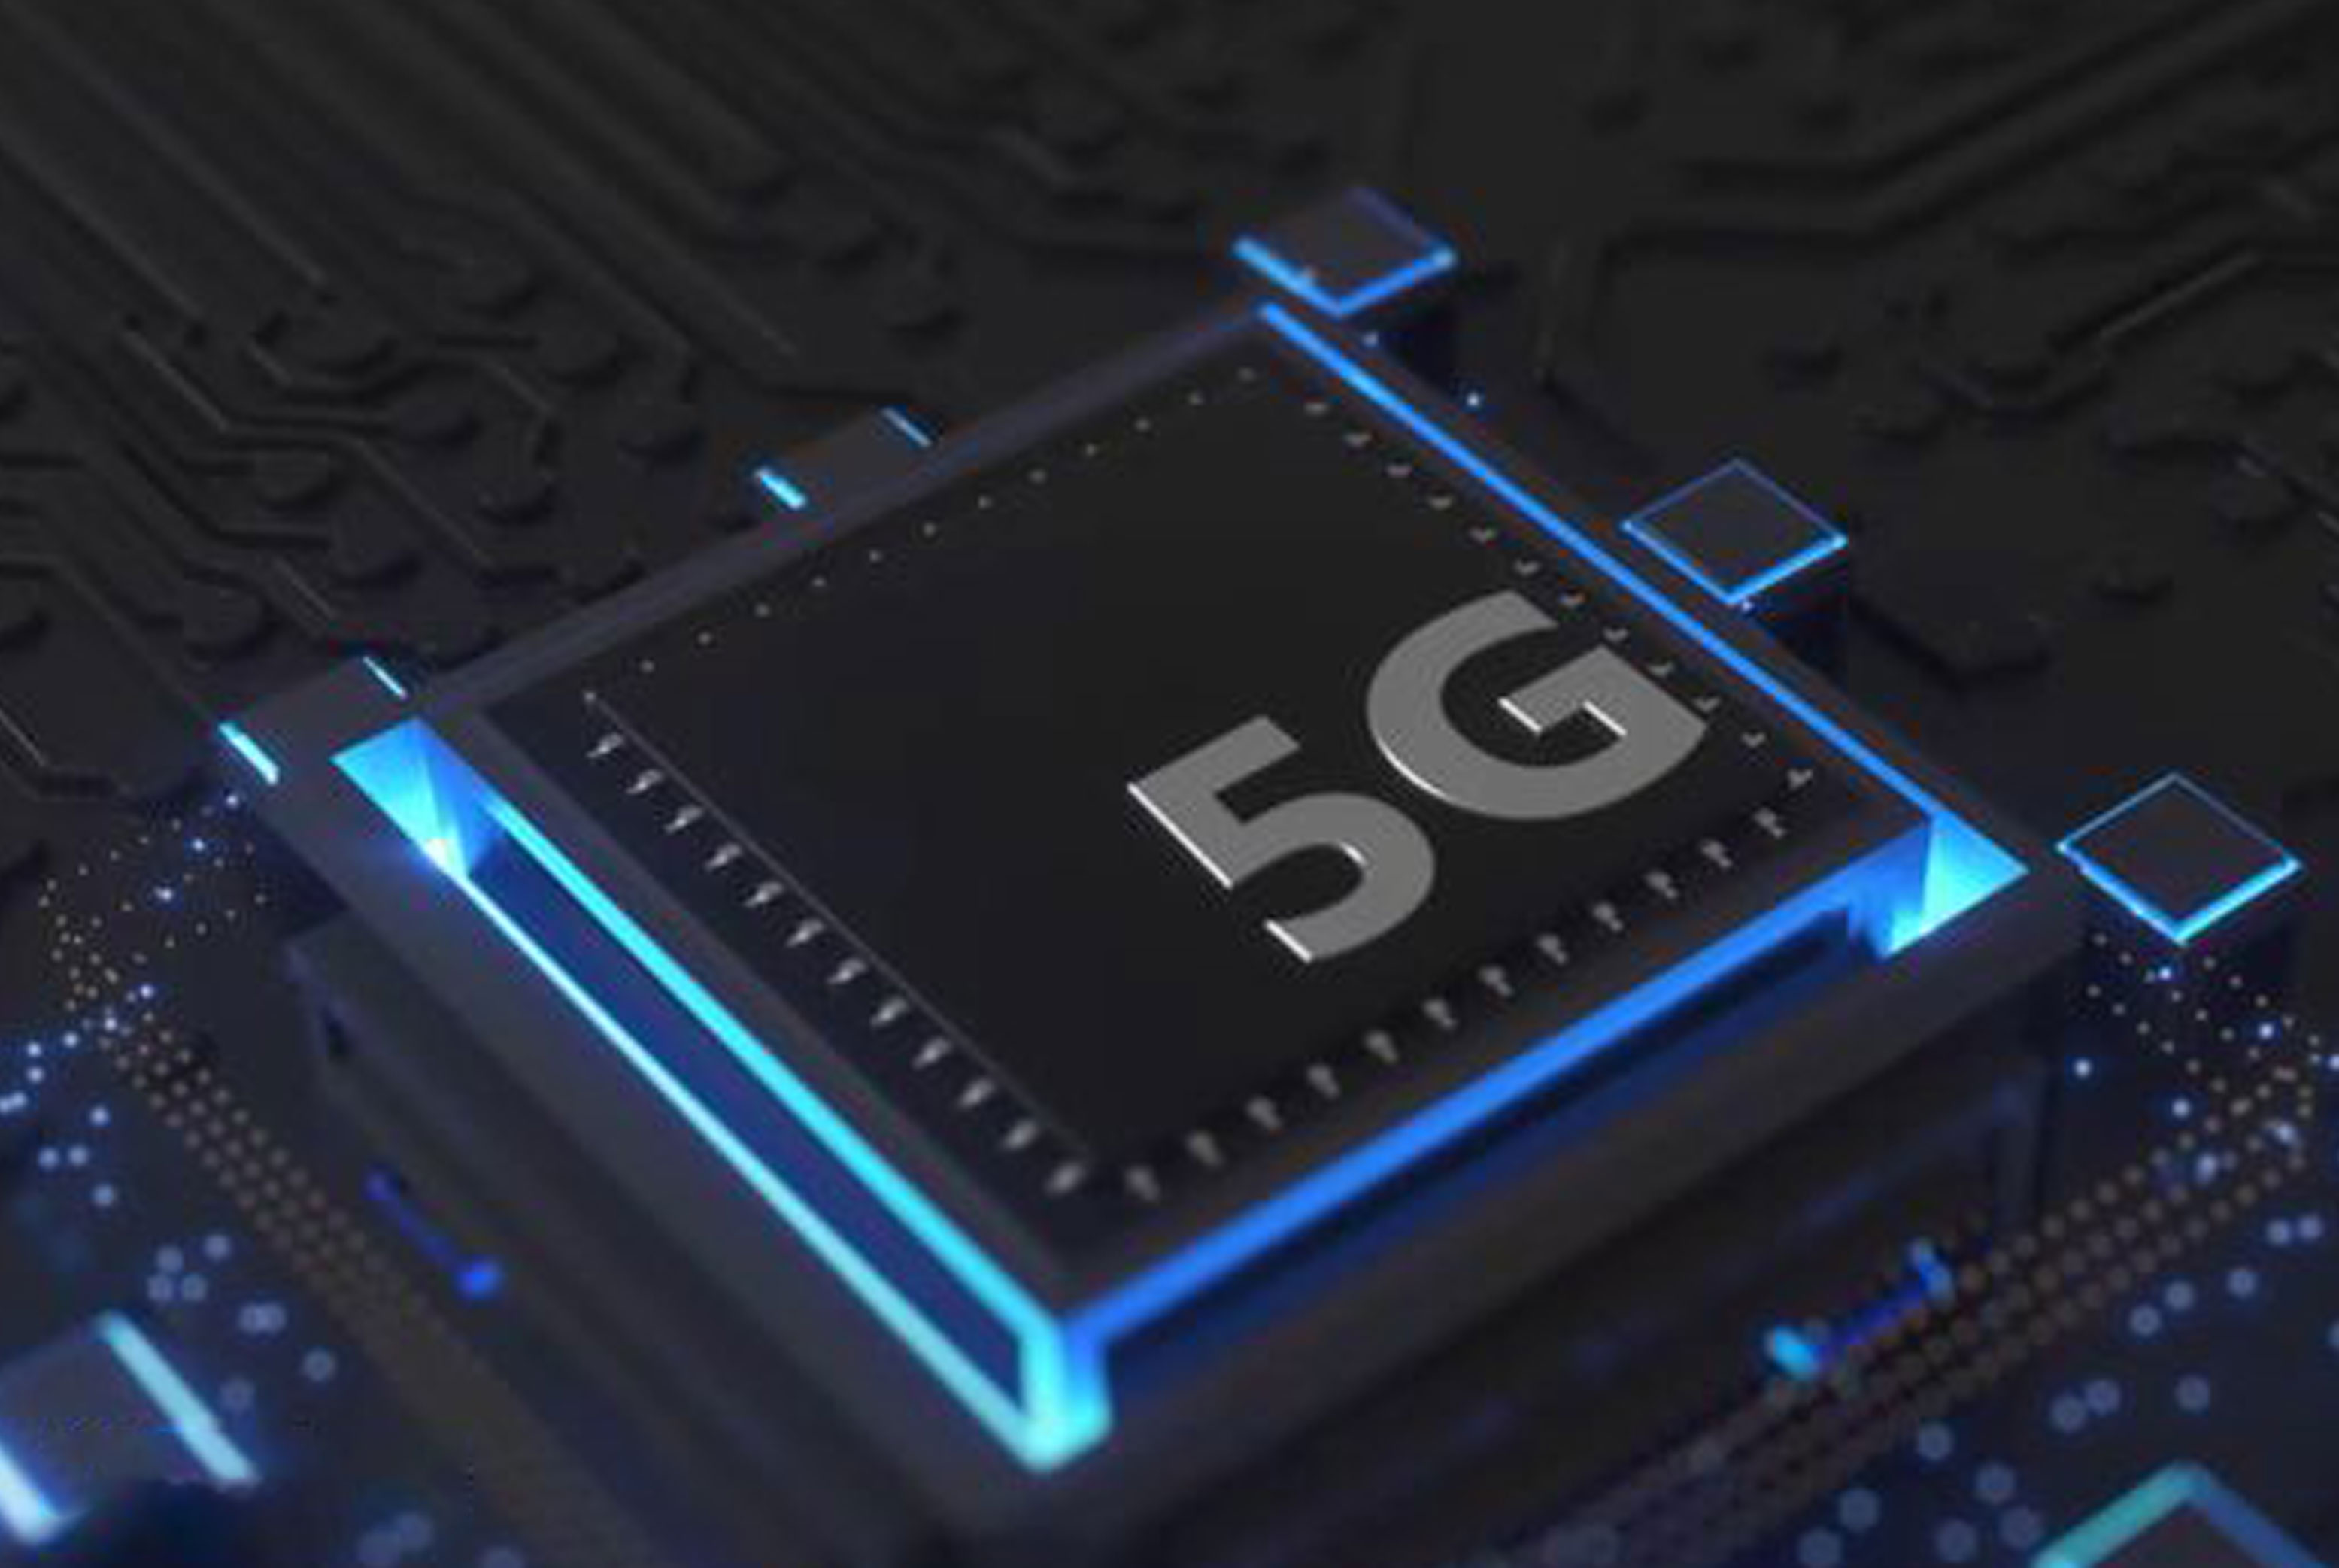 Acquisitions of electronic chips: 5G chips, new energy ICs, IoT ICs, Bluetooth ICs, diodes, etc.